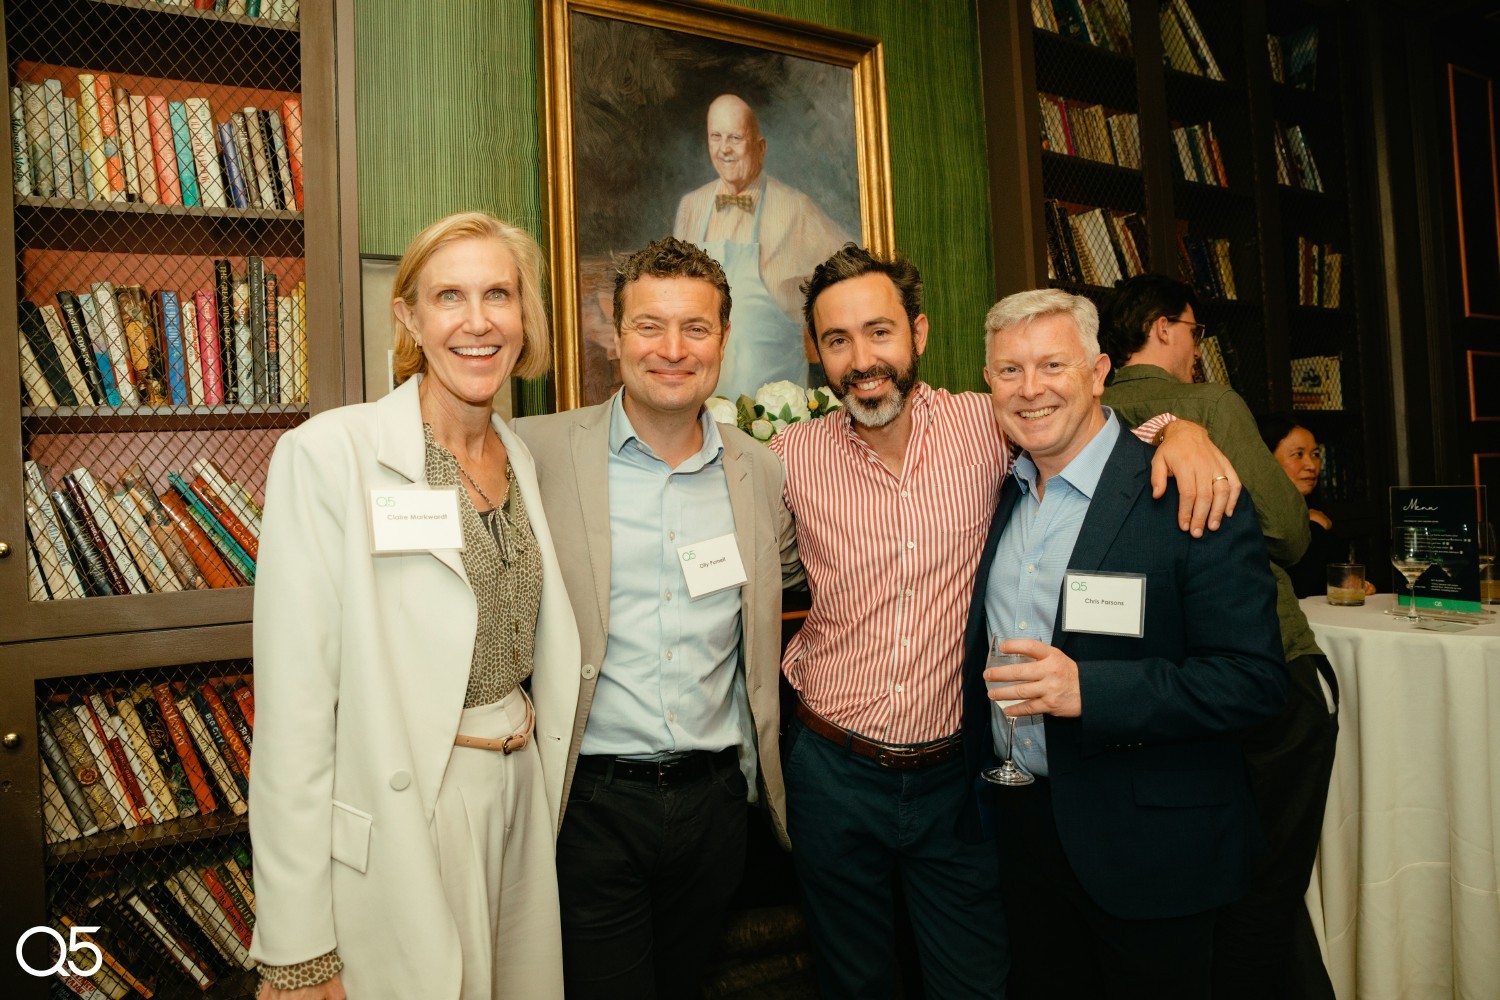 Partners of Q5, Olly, Chris, and Andy alongside North America MD Claire at the 10-year anniversary drinks in New York.